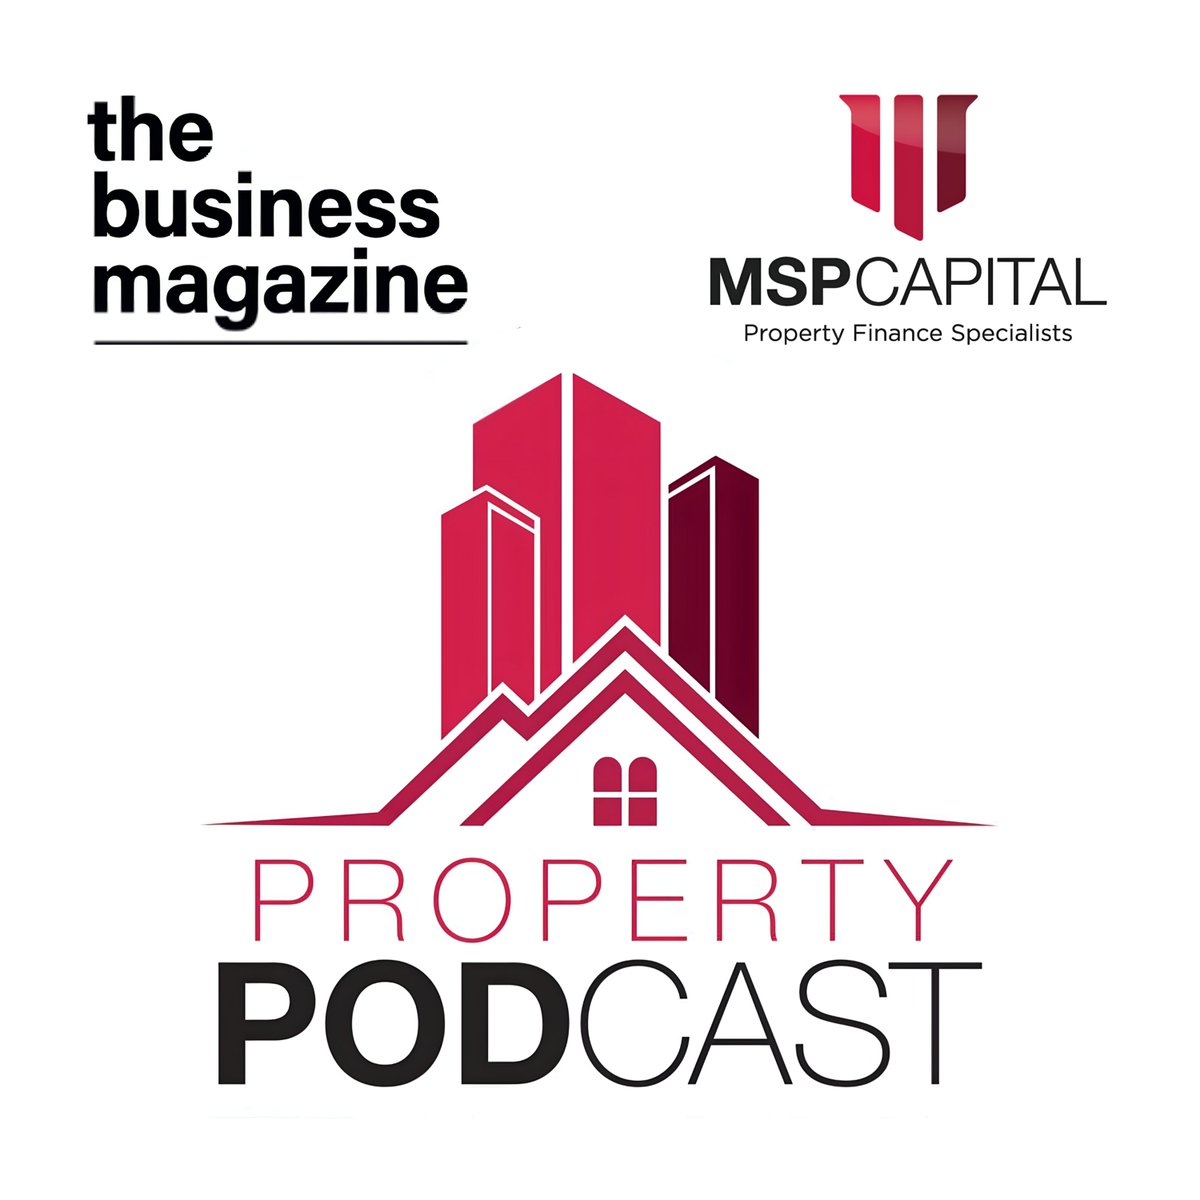 We’ve taken the discussion online 🔊🌐 Episode 3 of The Business Magazine Property Podcast has dropped! @MSP_Capital @VailWilliams #podcast #property #ukproperty #propertypodcast #ukbusiness #businessnews #businessintelligence thebusinessmagazine.co.uk/podcasts/